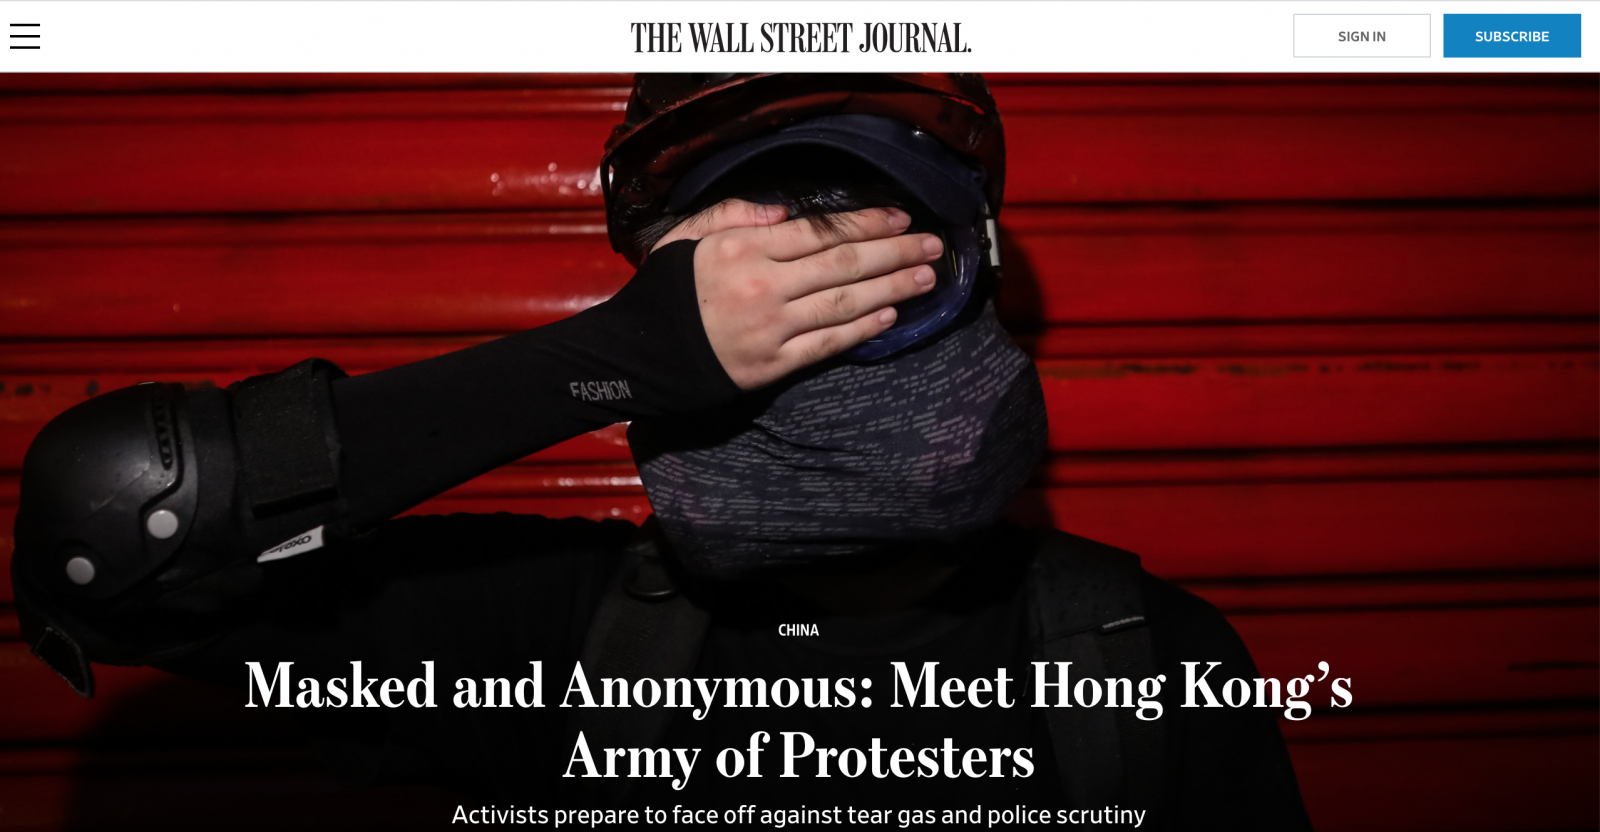 The Wall Street Journal - Masked and Anonymous: Meet Hong Kong's Army of Protestors